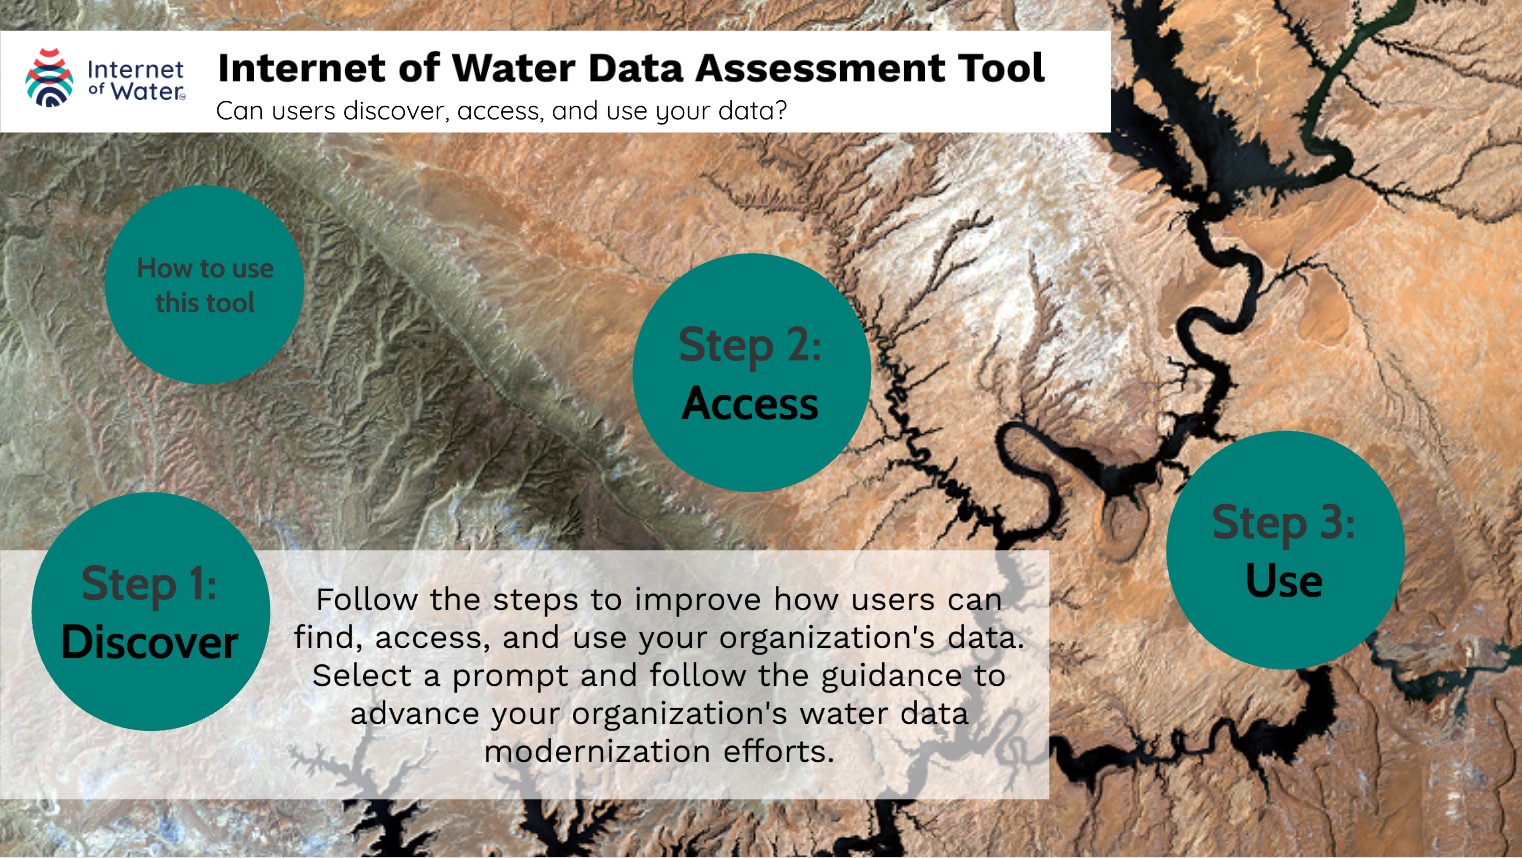 Internet of Water Data Infrastructure Assessment Tool